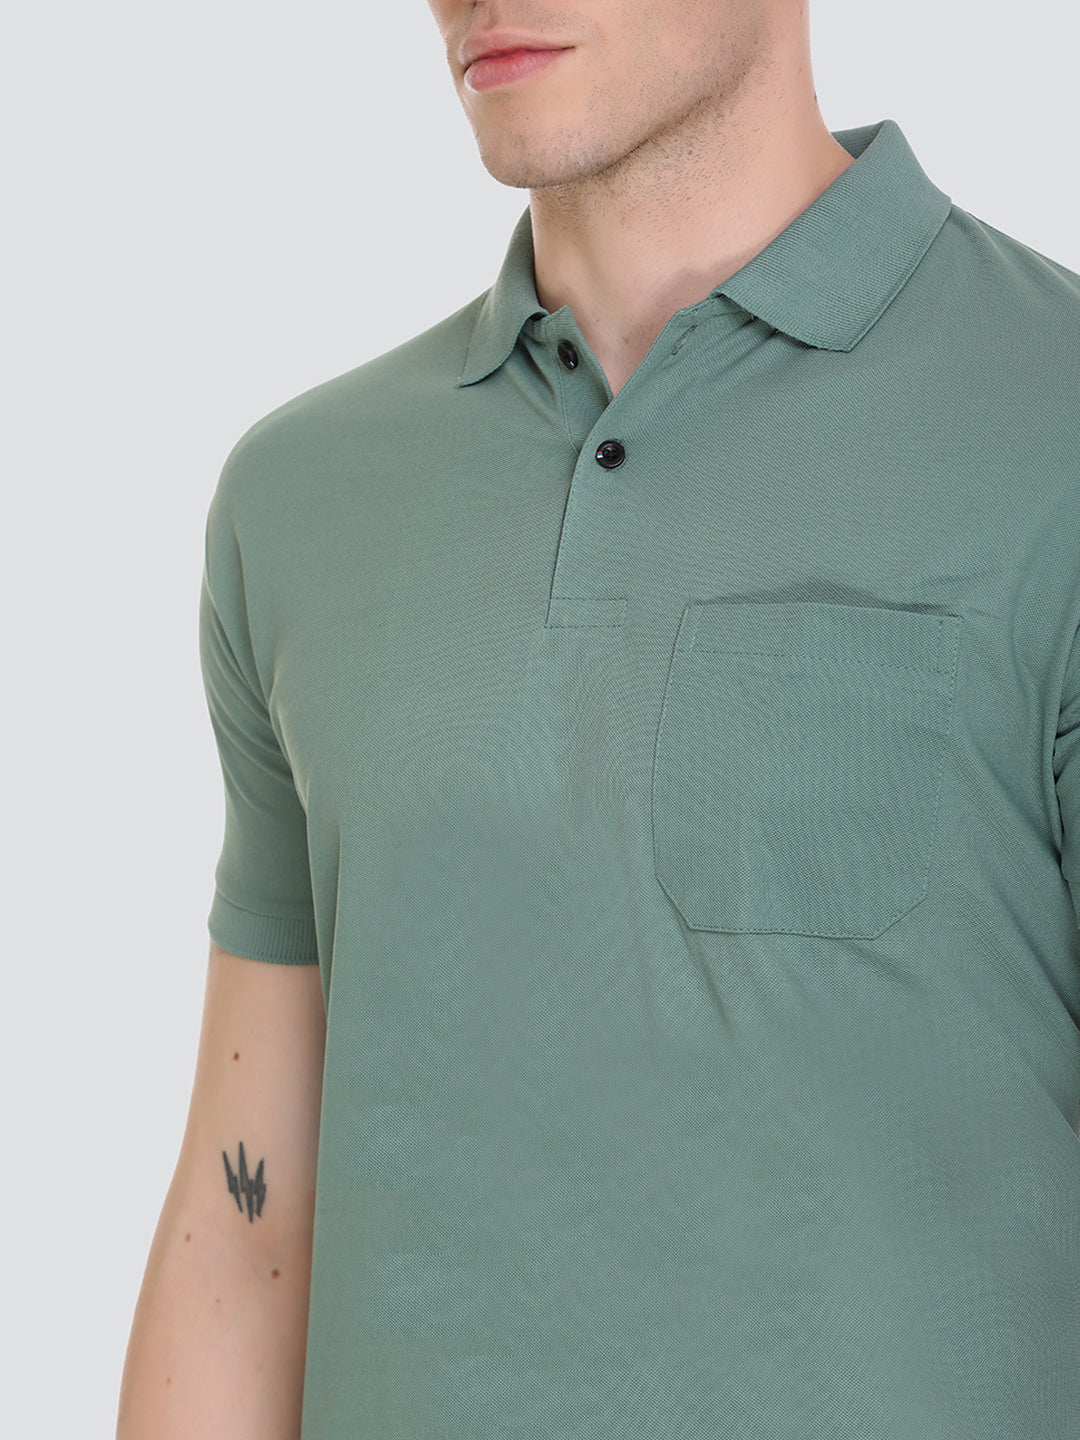 Comfortable Jinxer Polo Neck T Shirt for men online in India